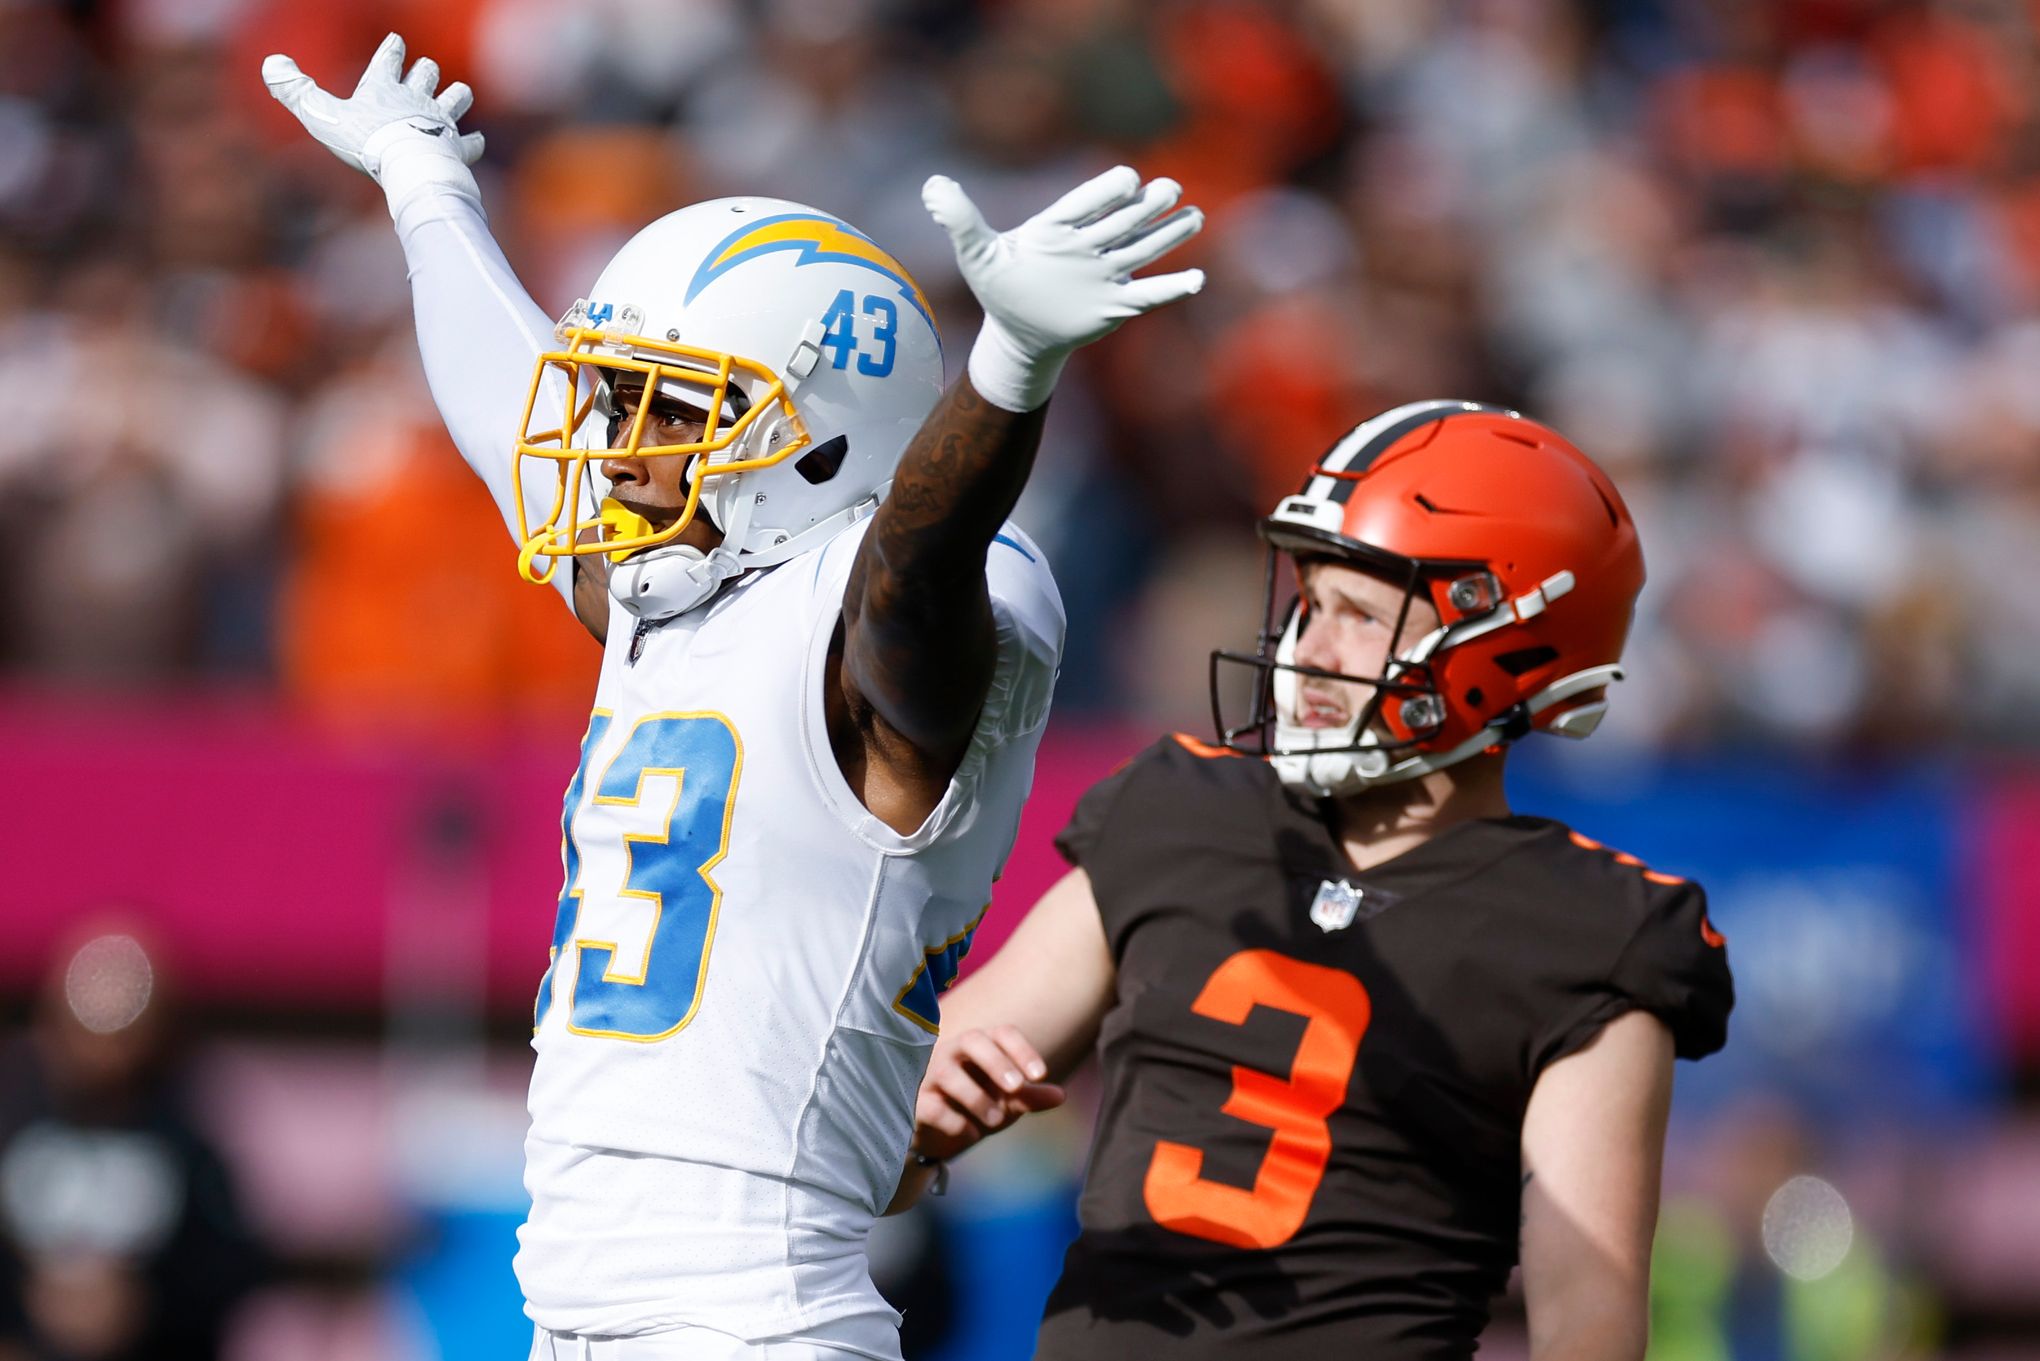 Chargers hang on, beat Browns 30-28 after LA coach's gamble